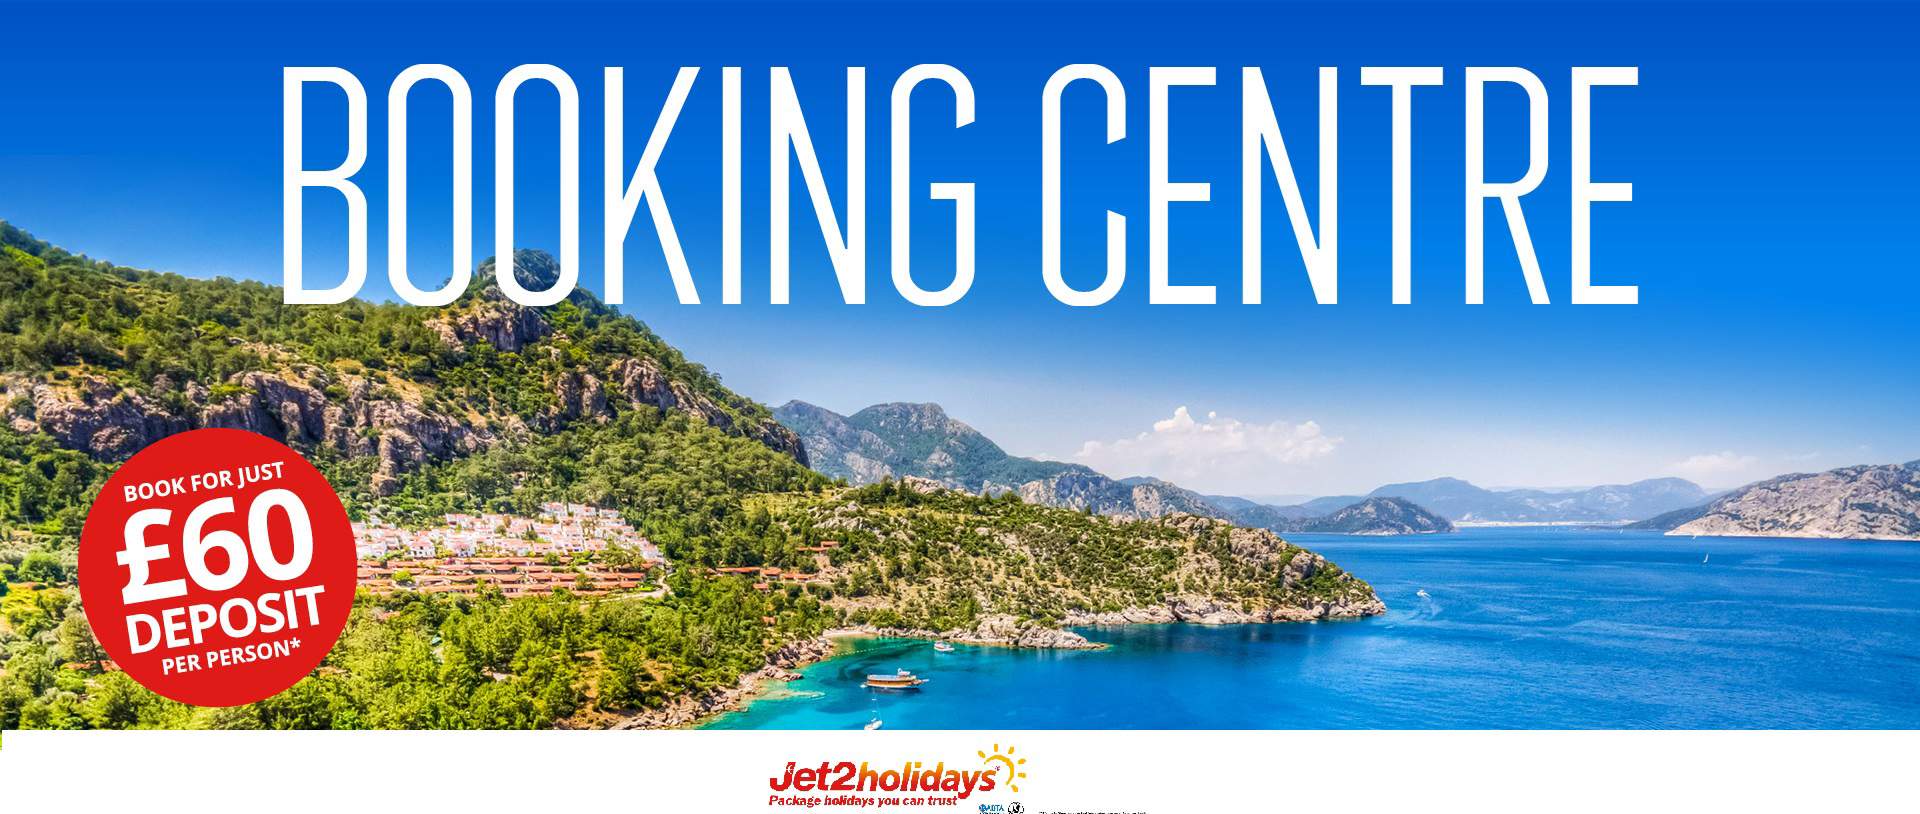 co op travel jet2holidays